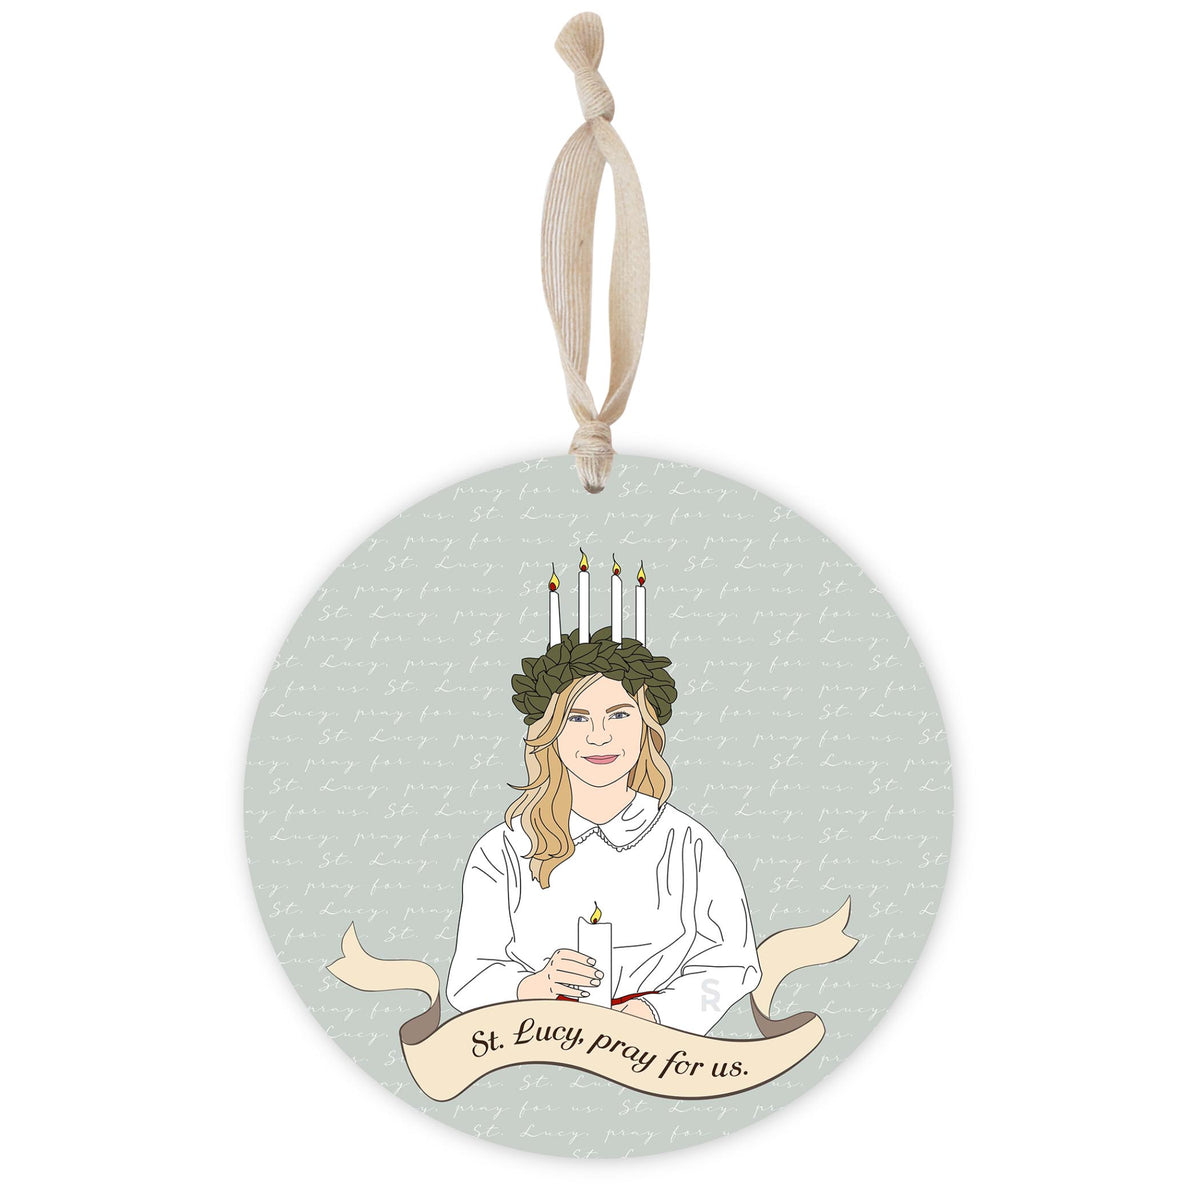 St. Lucy Round 8 inch Hanging Wood Plaque